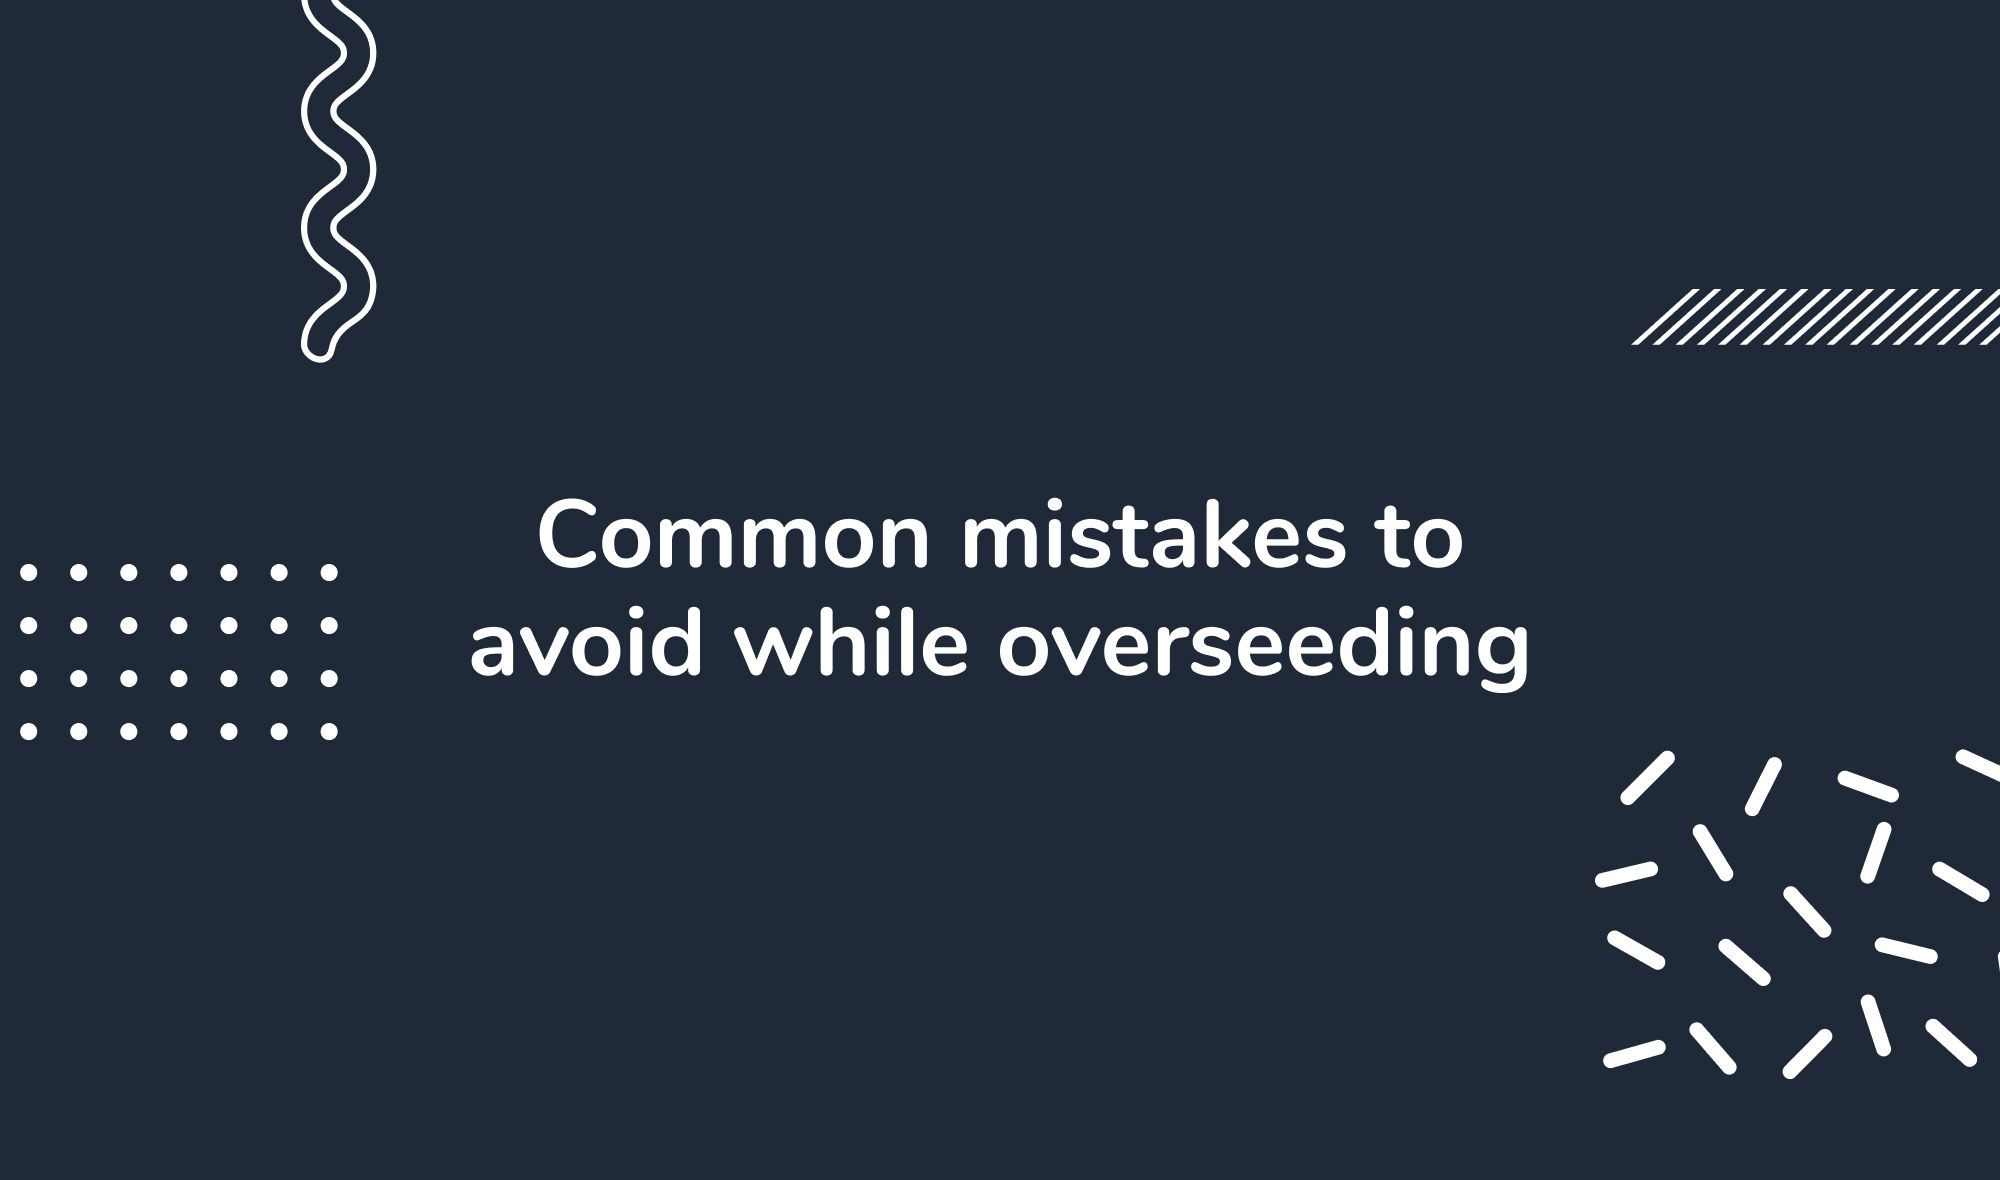 Common mistakes to avoid while overseeding